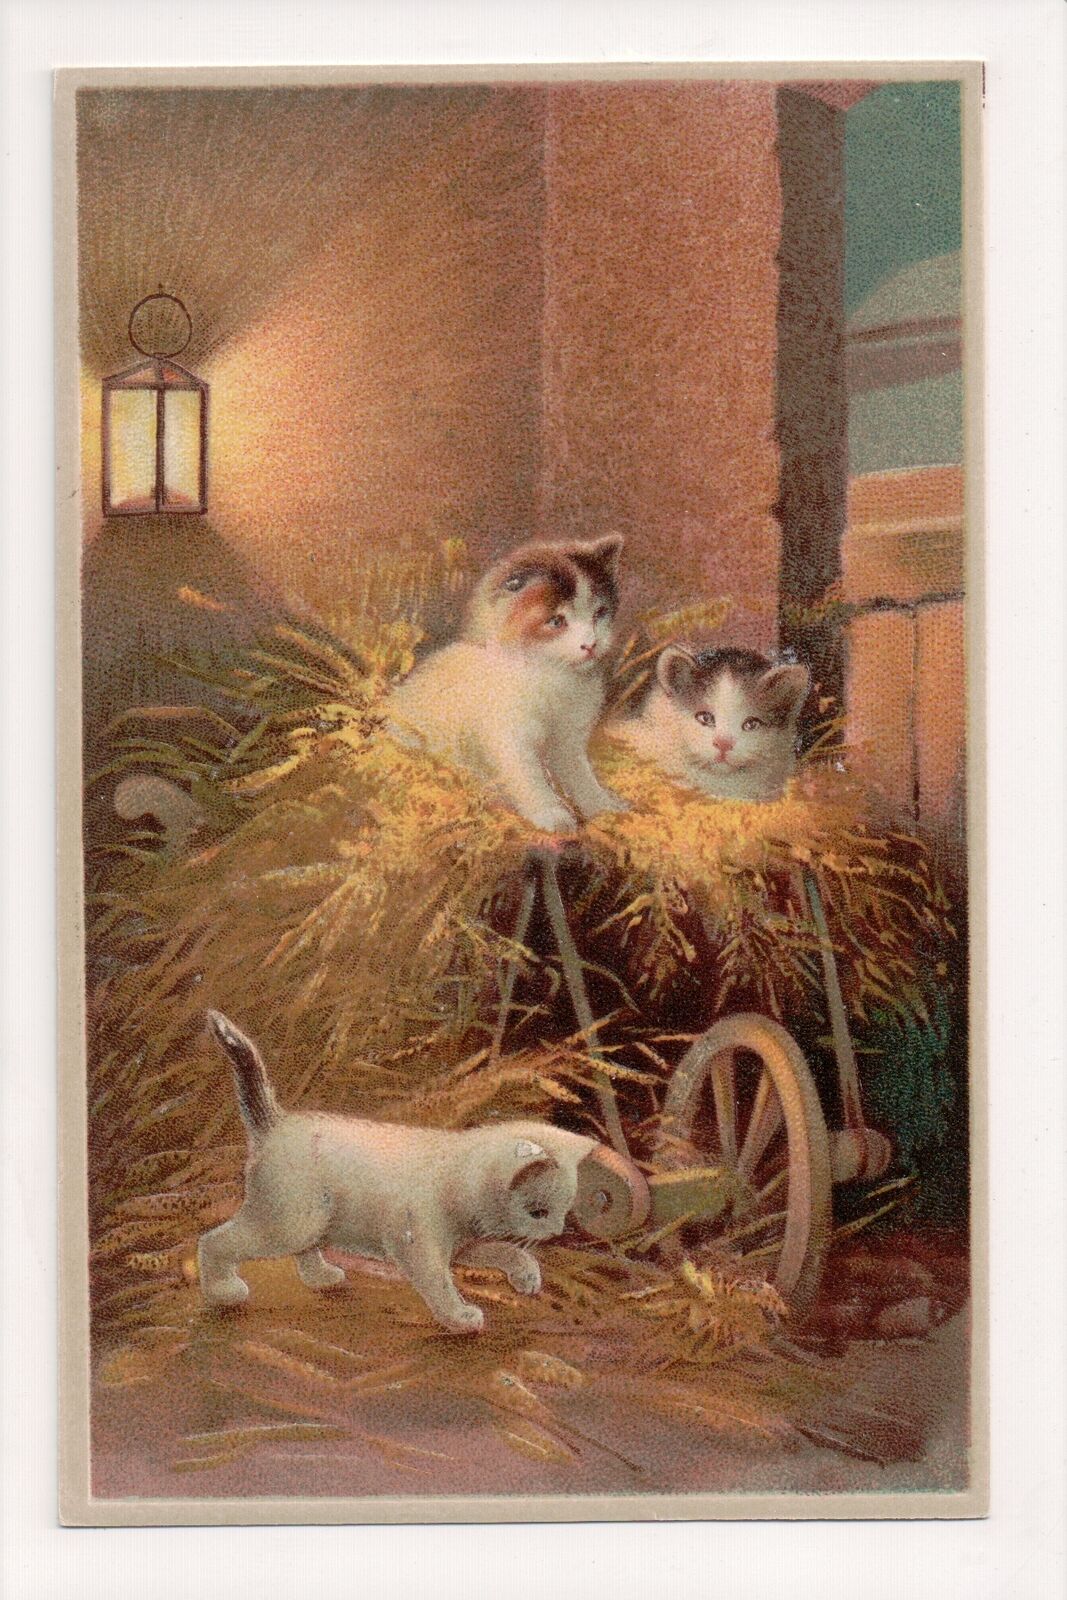 K-325 Adorable Little Kittens Playing in Hay Early German Embossed Postcard